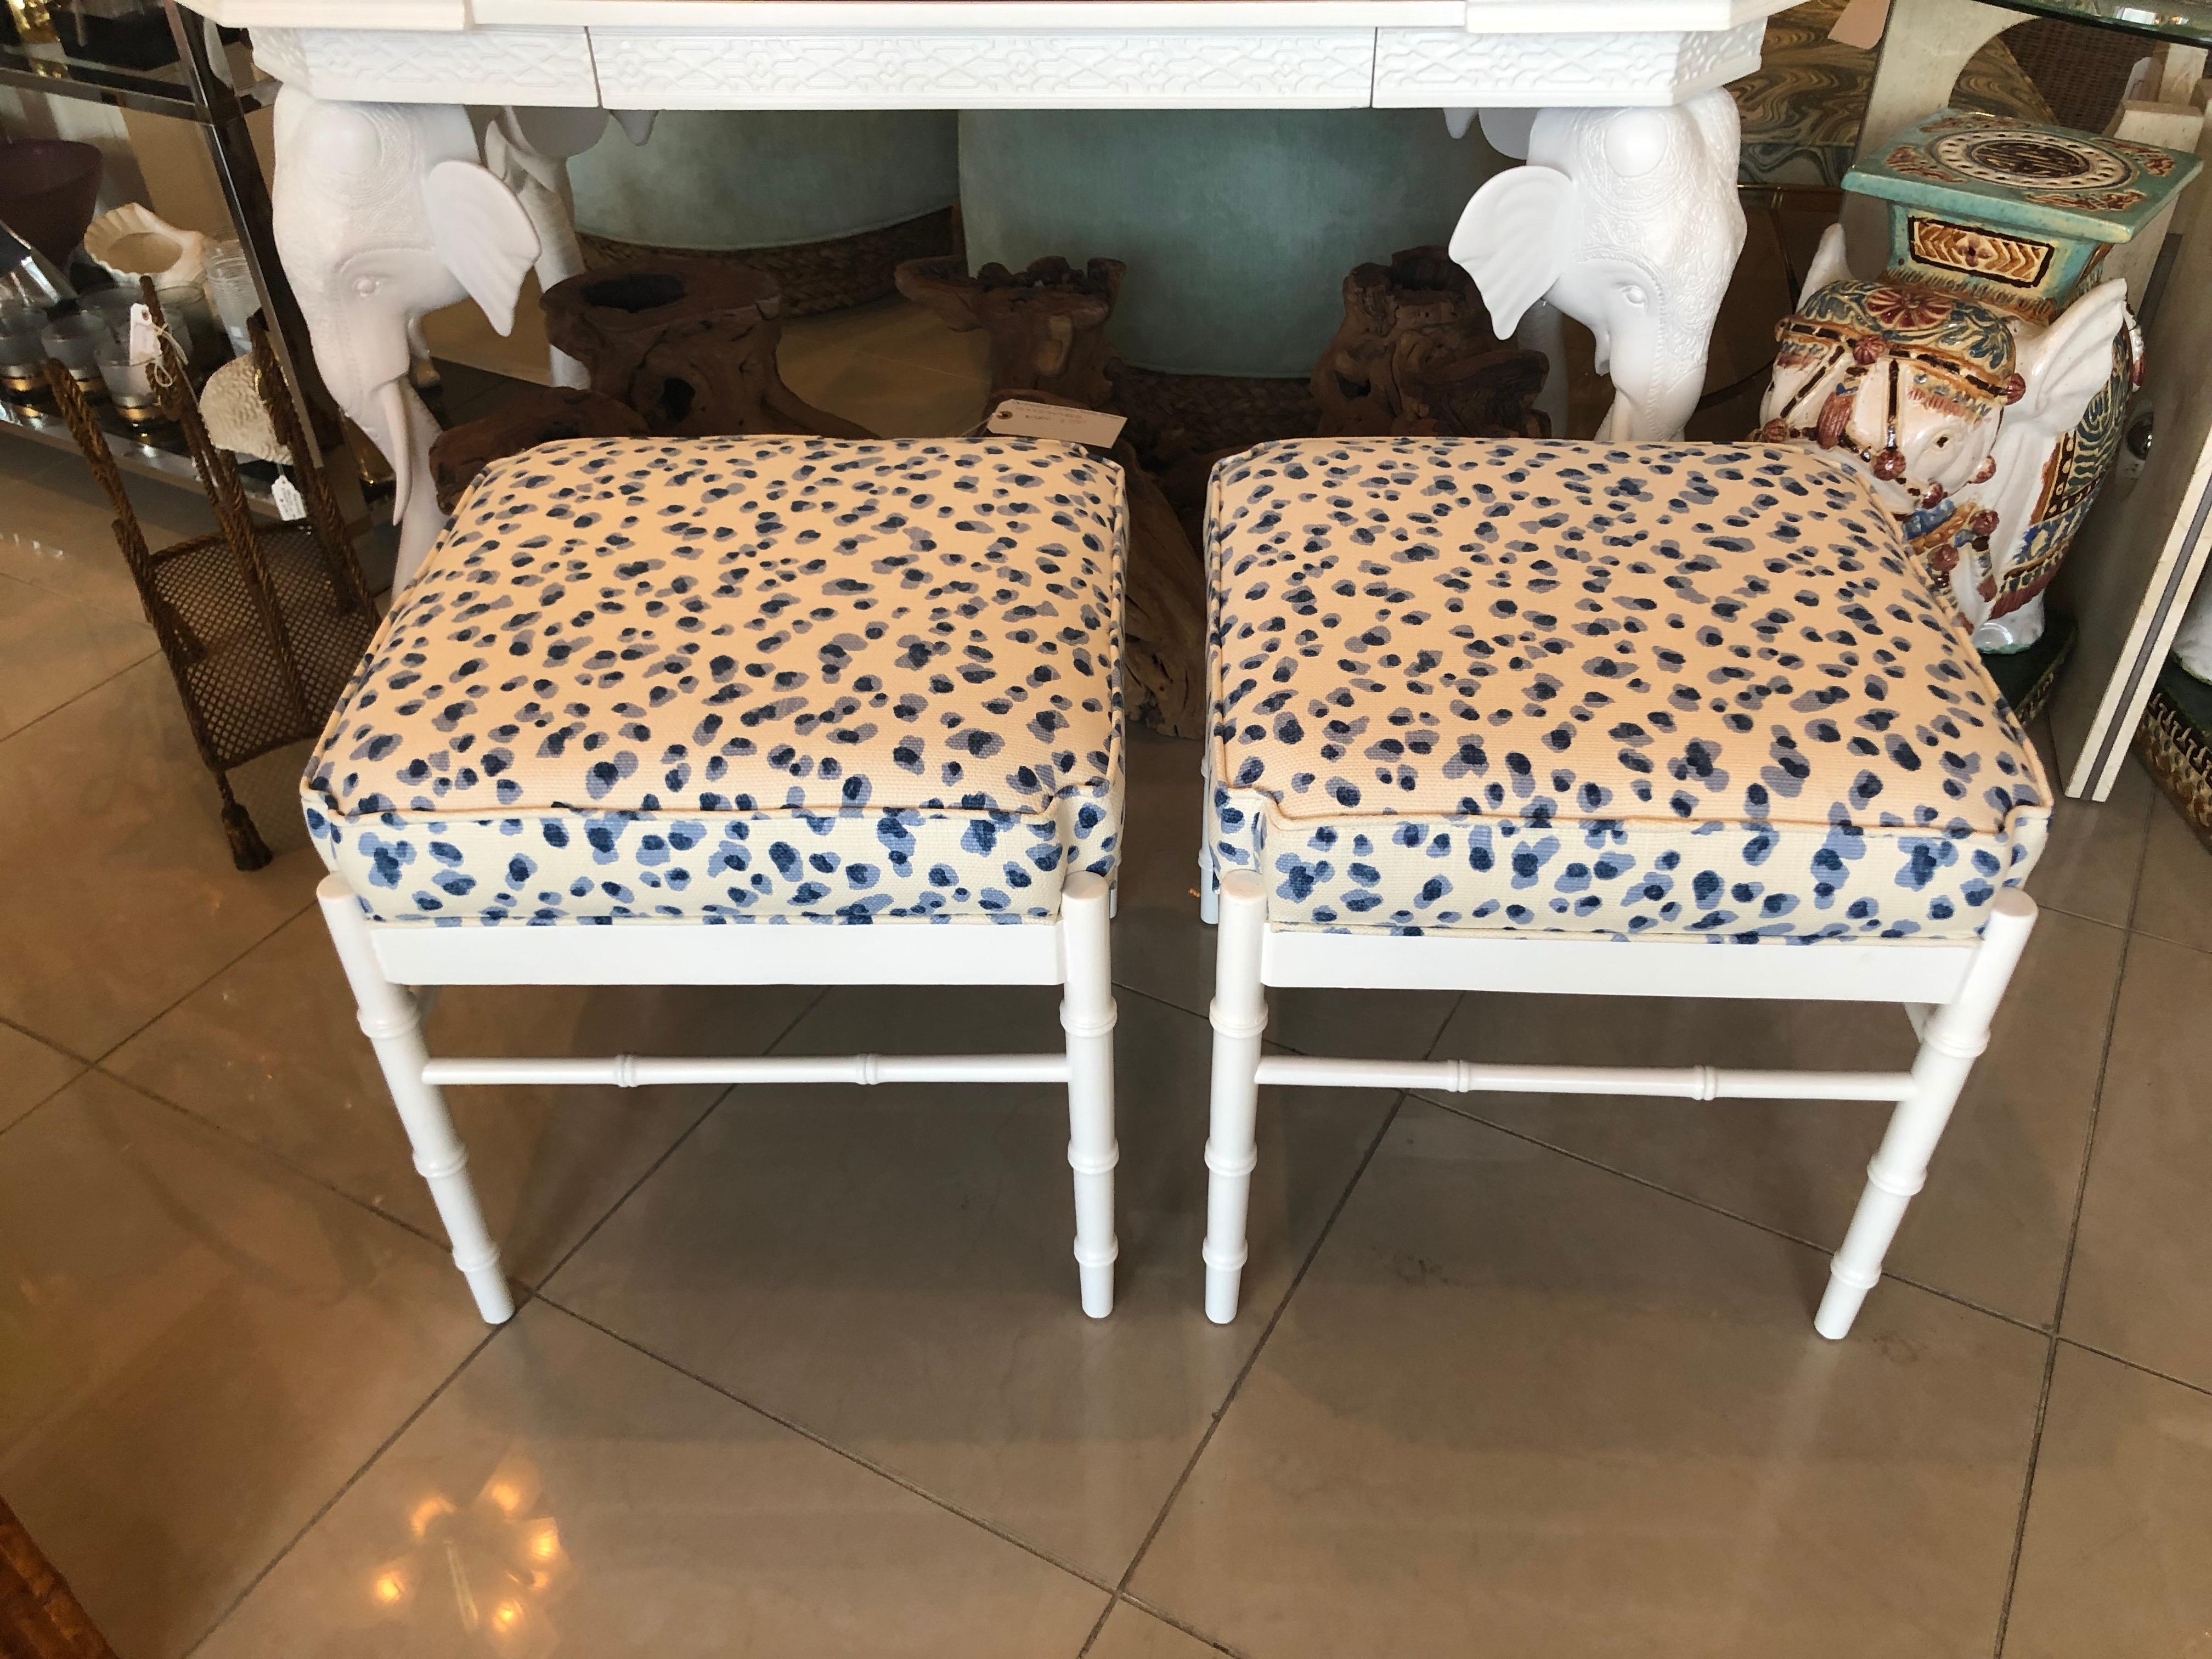 Lovely faux bamboo vintage pair of ottomans, benches, stools. Newly, professionally lacquered in a white gloss finish. Newly upholstered with all new foam.